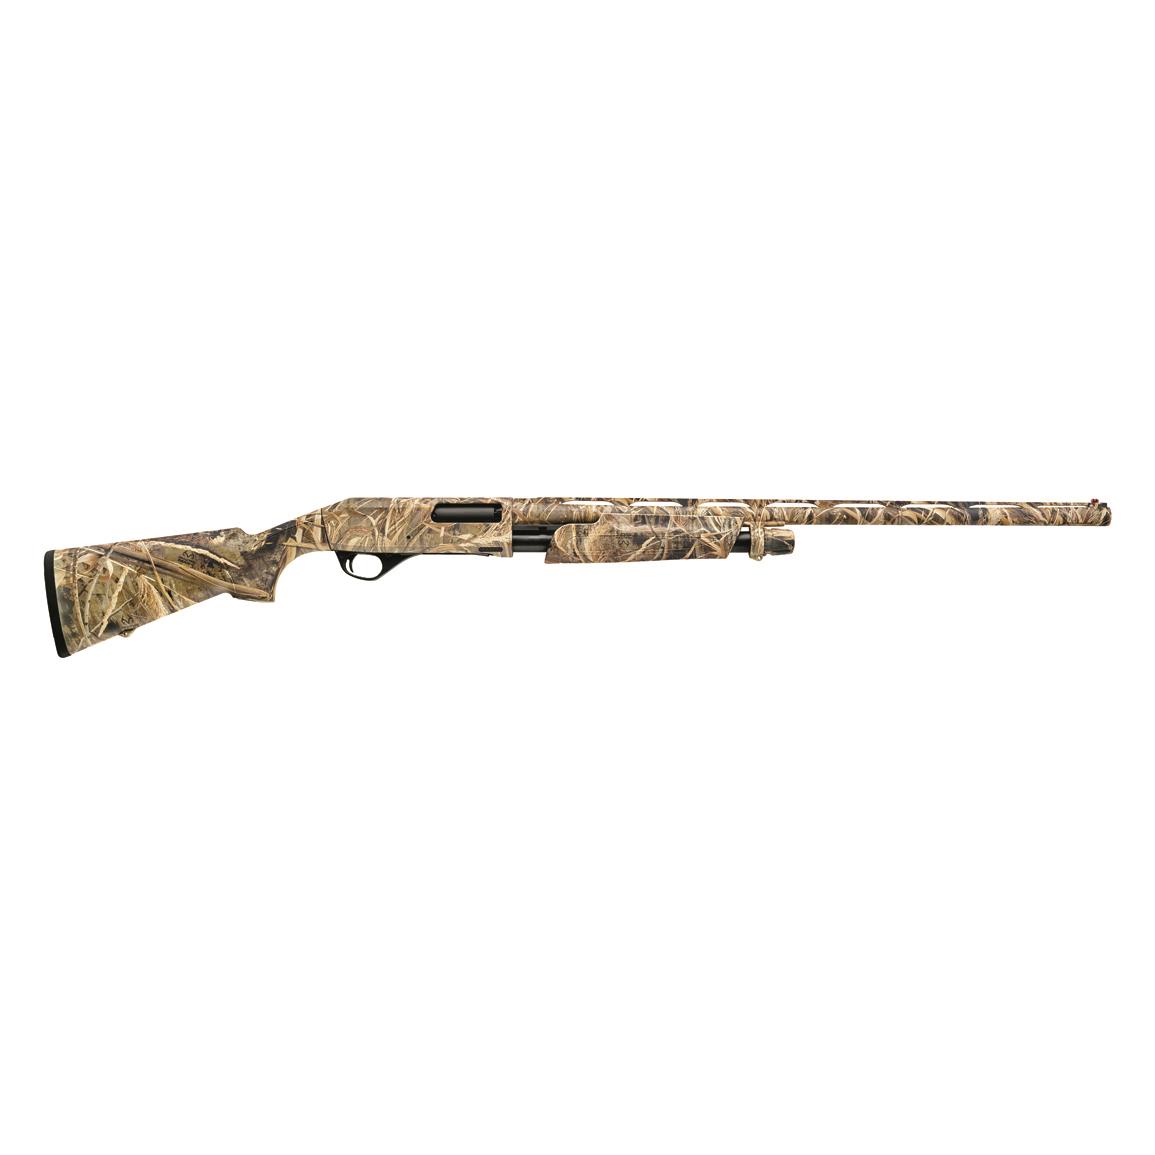 Stoeger P3000, Pump Action, 12 Gauge, 28" Barrel, Realtree Max-5 Synthetic Stock, 5+1 Rounds